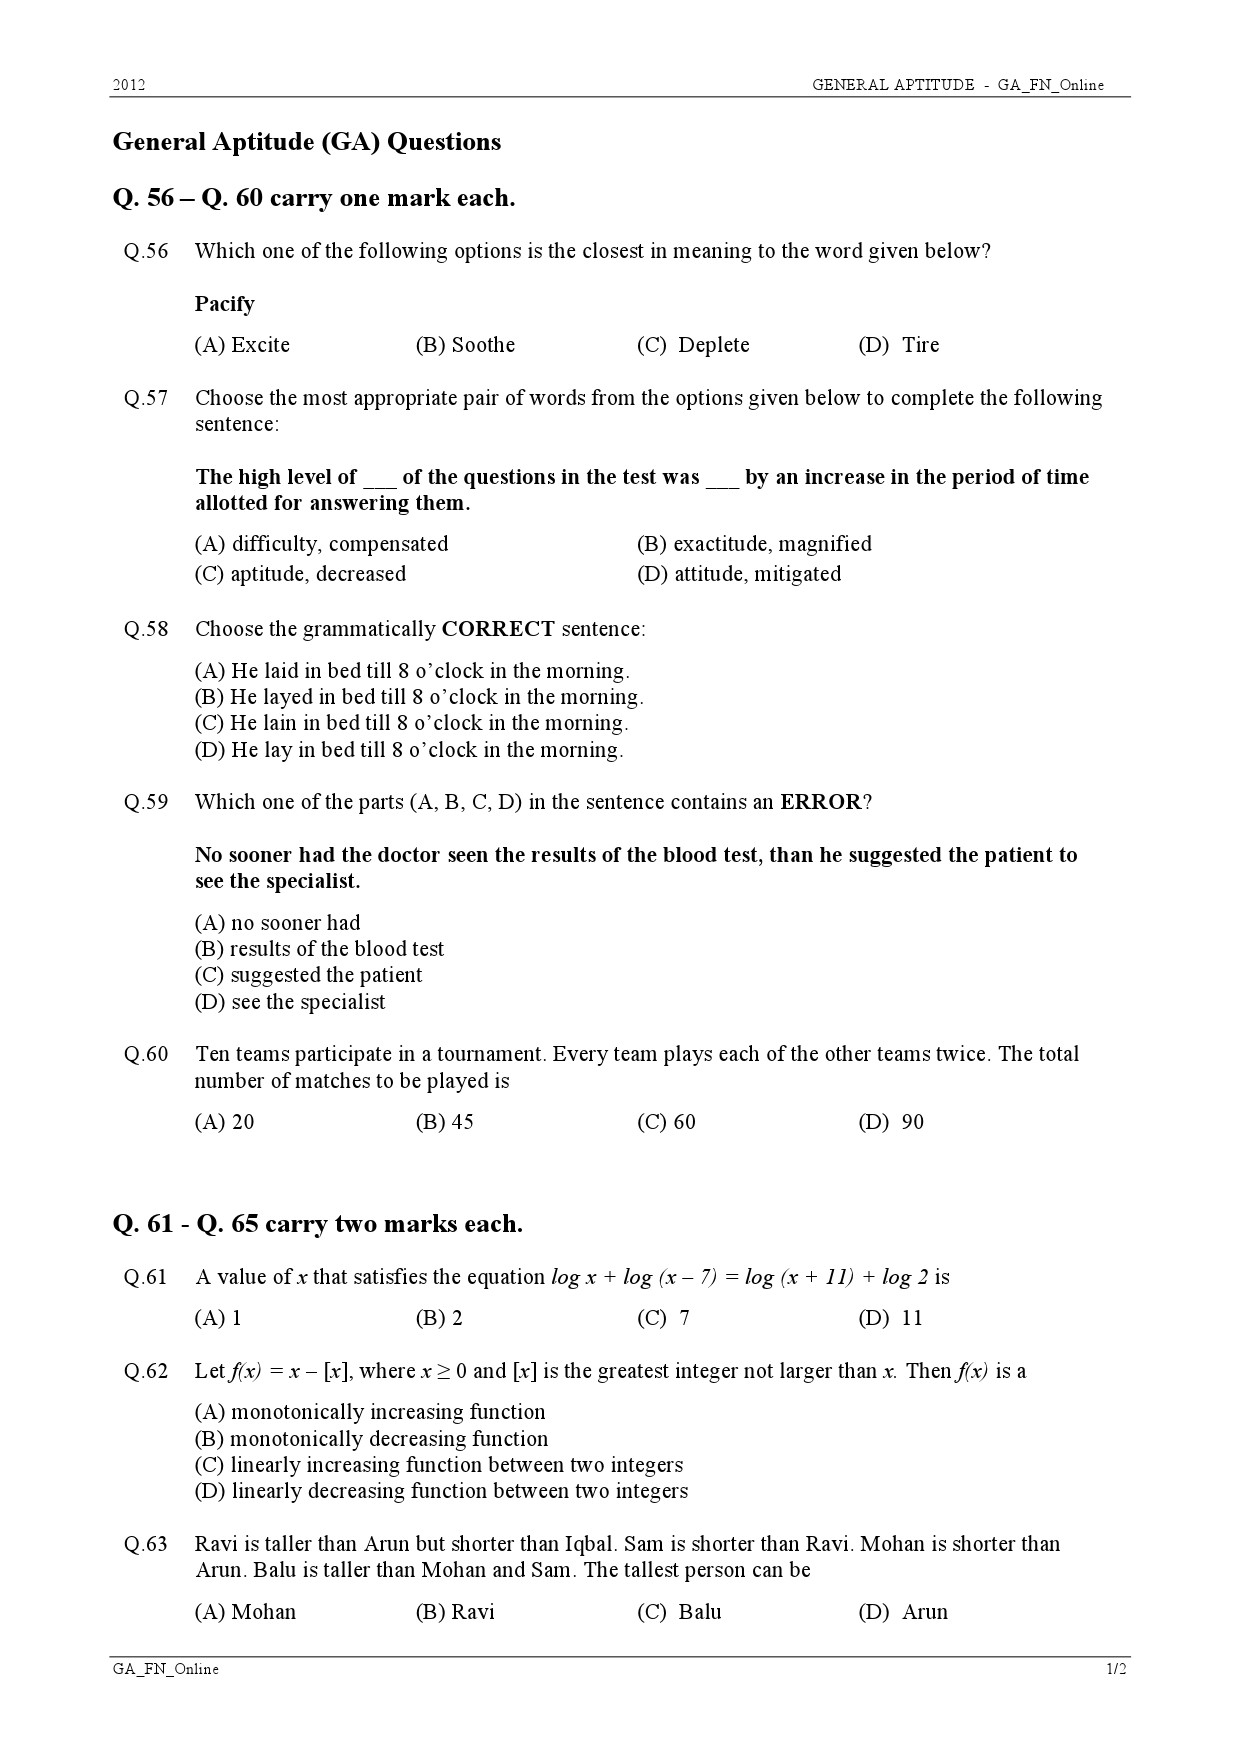 GATE Exam Question Paper 2012 Textile Engineering and Fibre Science 10